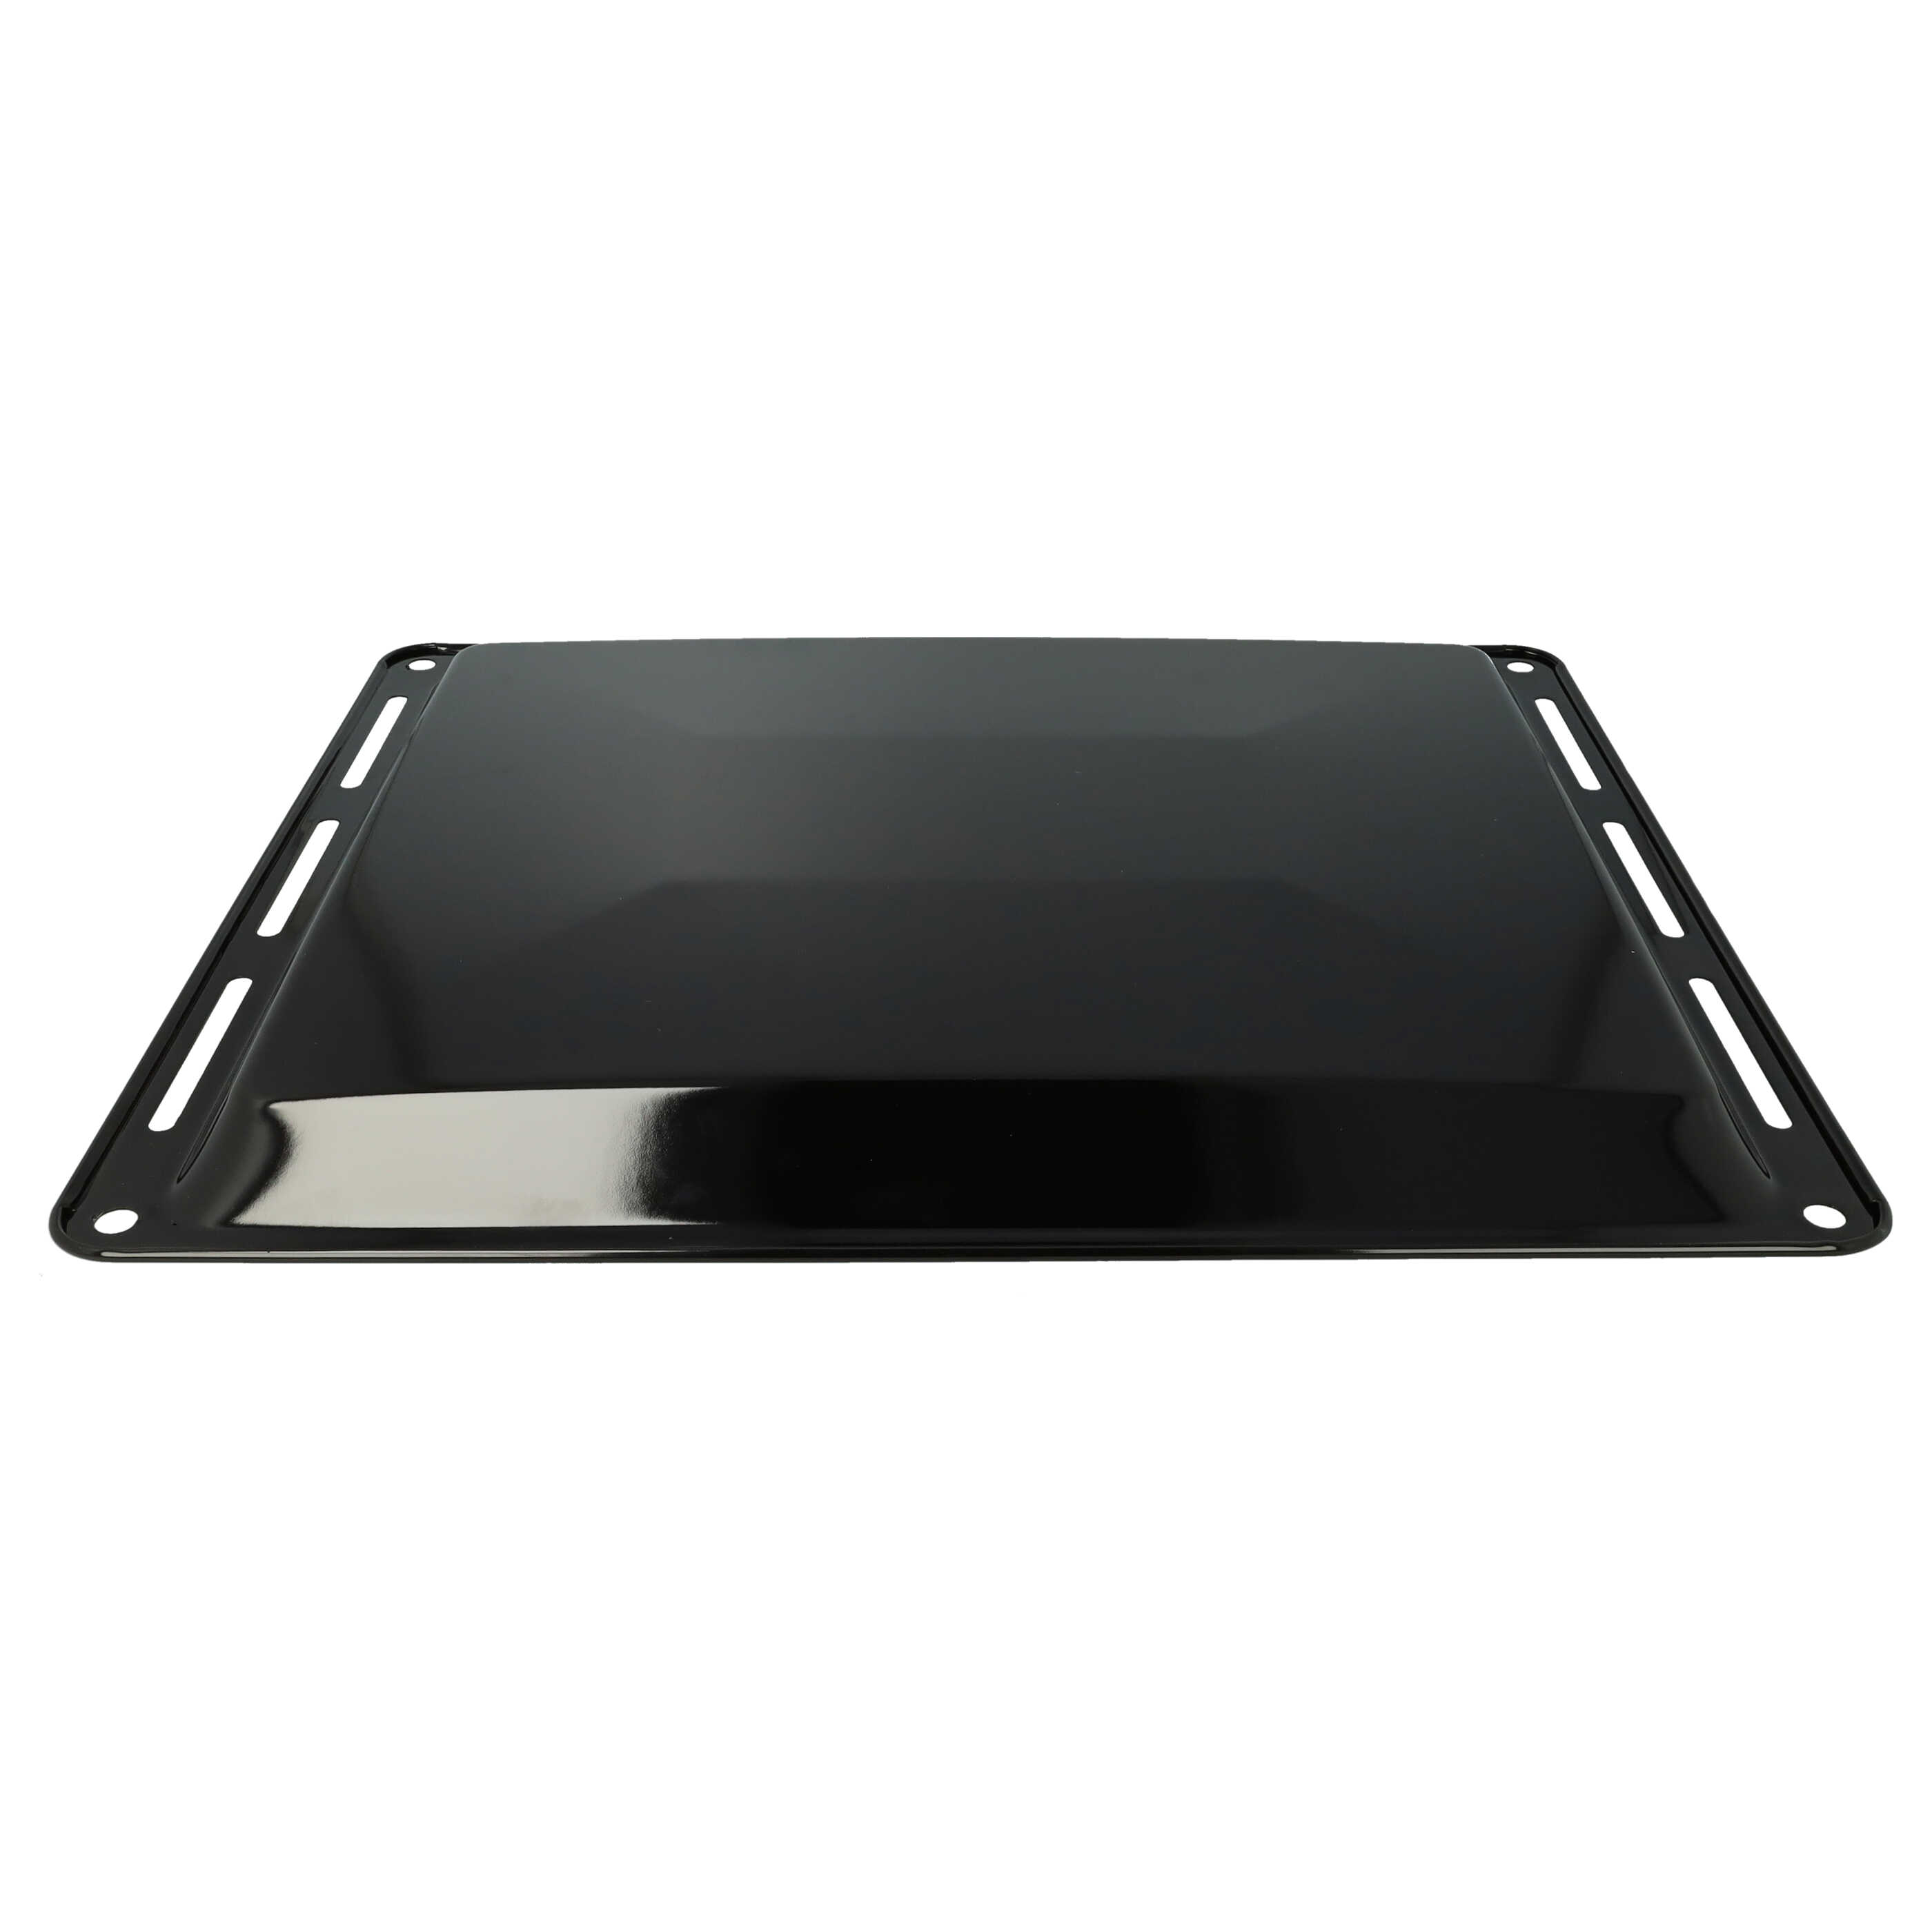 Baking Tray as Replacement for Indesit C00325793, ARI325934, C00325934 Oven - 44.5 x 37.5 x 2.5 cm